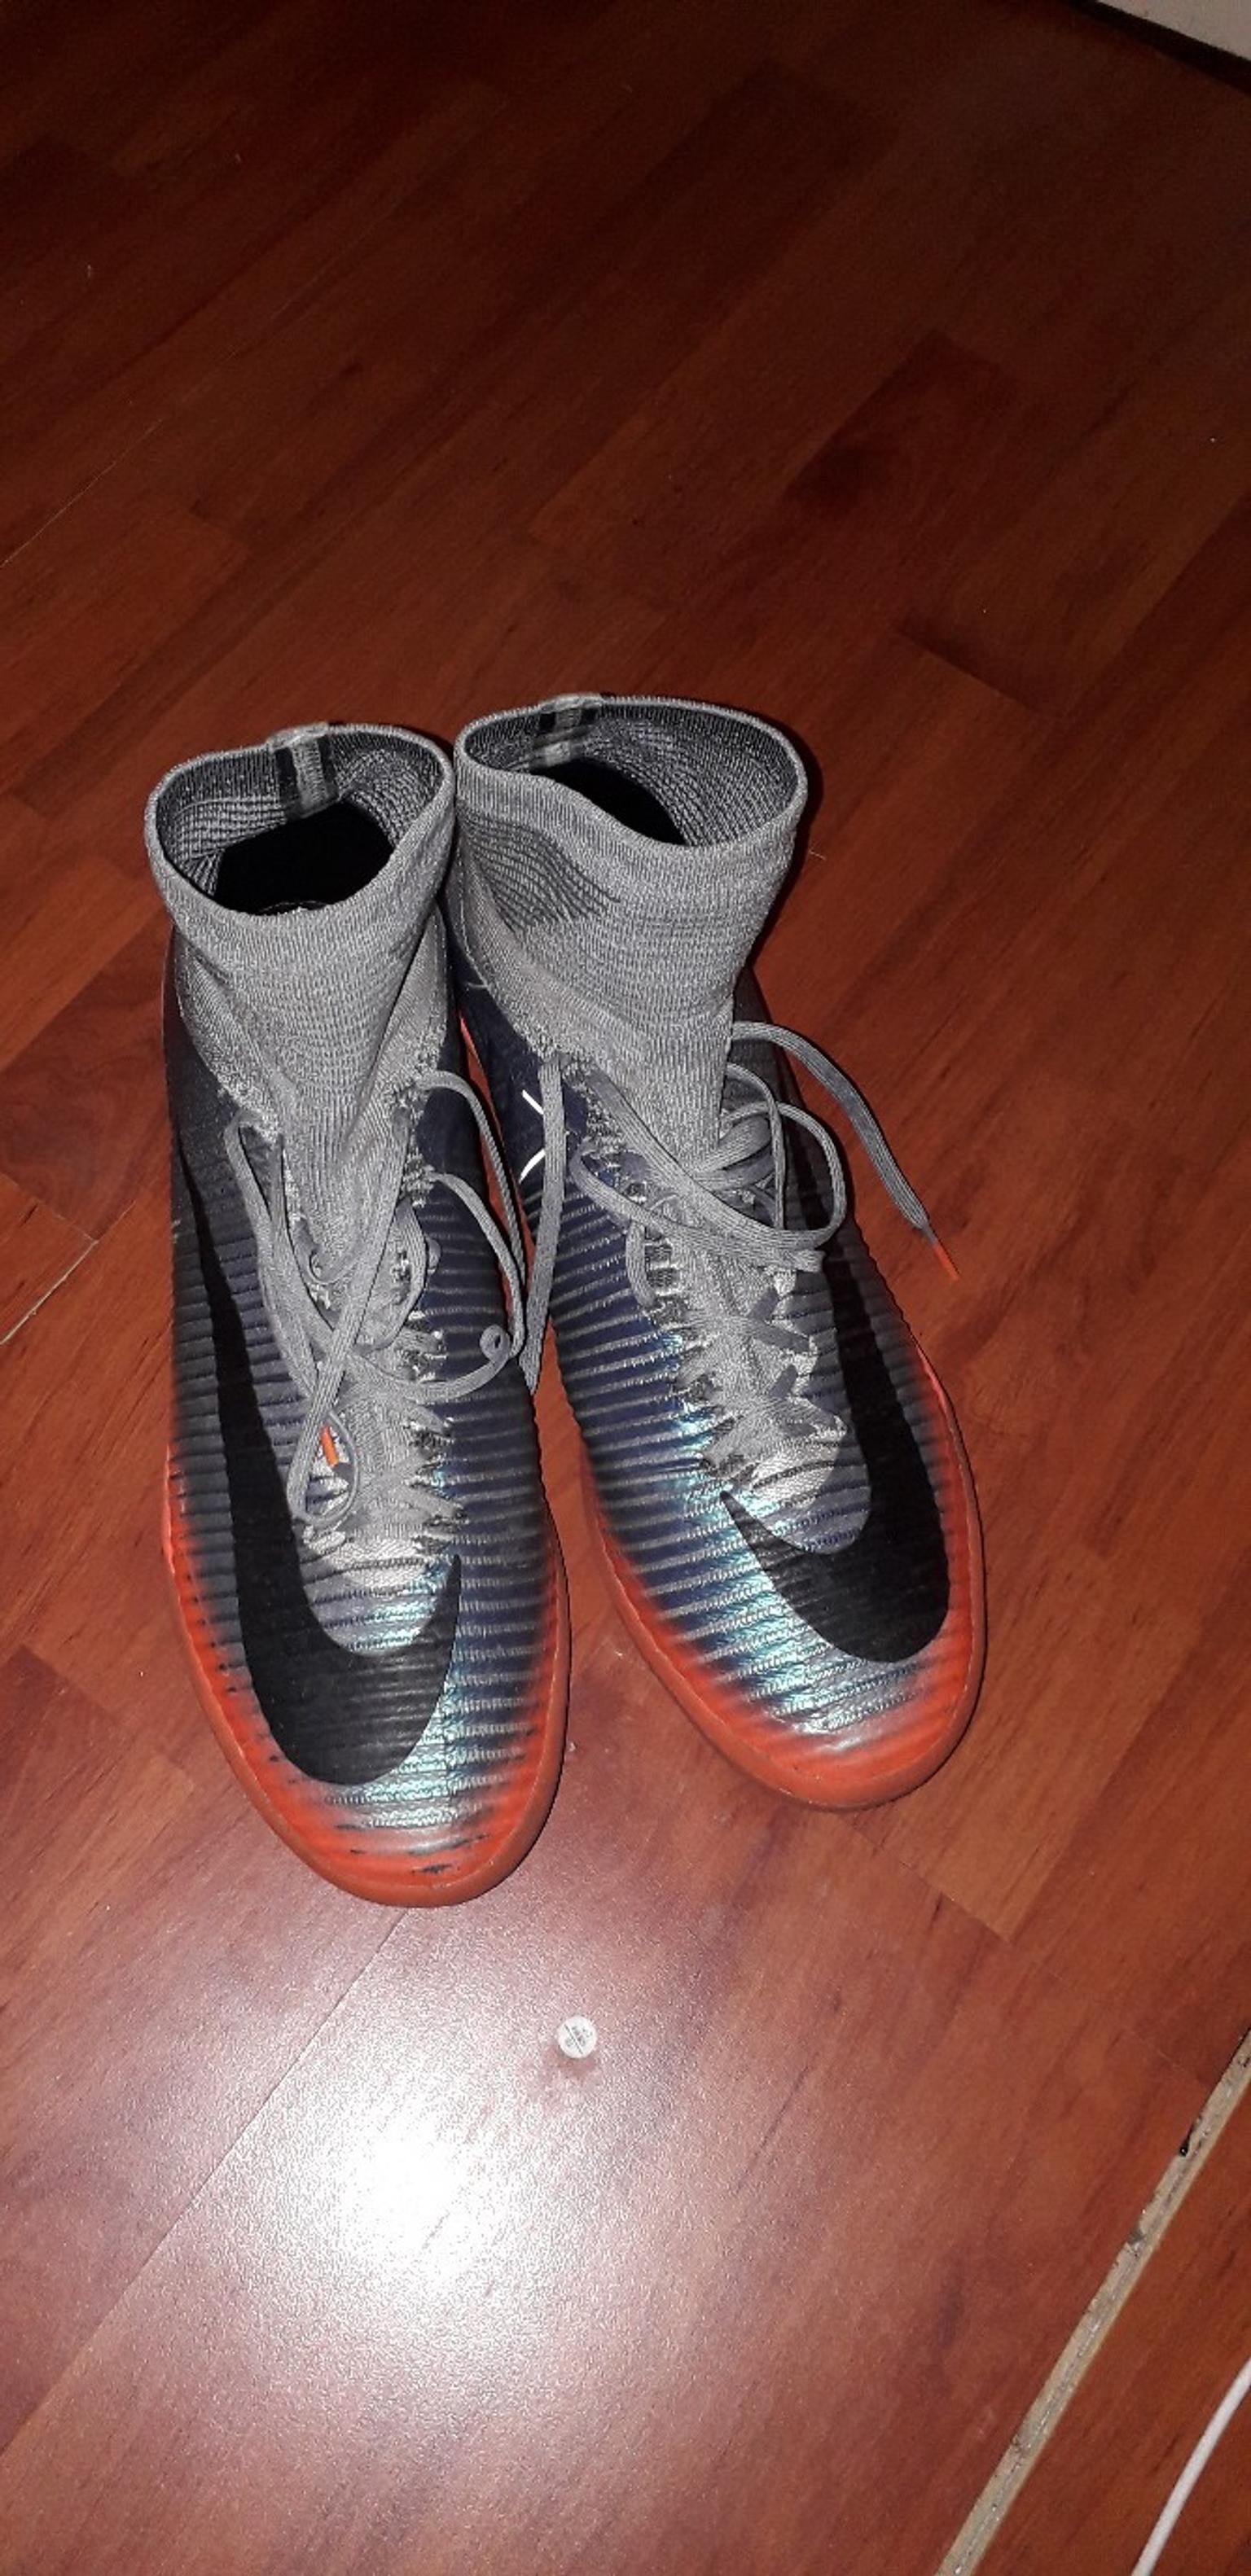 Price history for Nike Mercurial Superfly VI Club CR7 LVL UP.